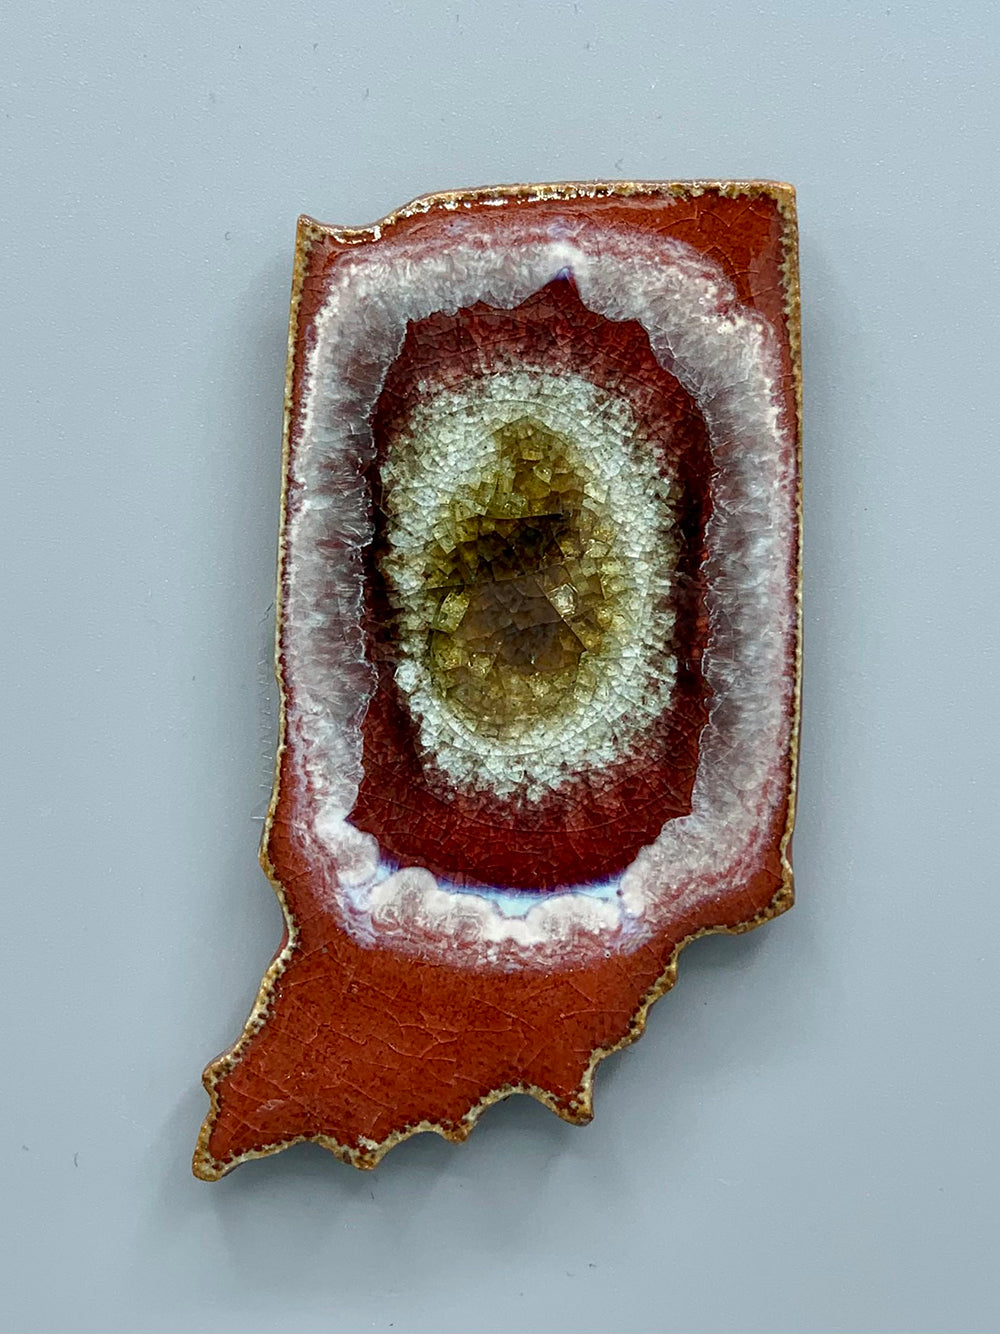 Indiana Magnet